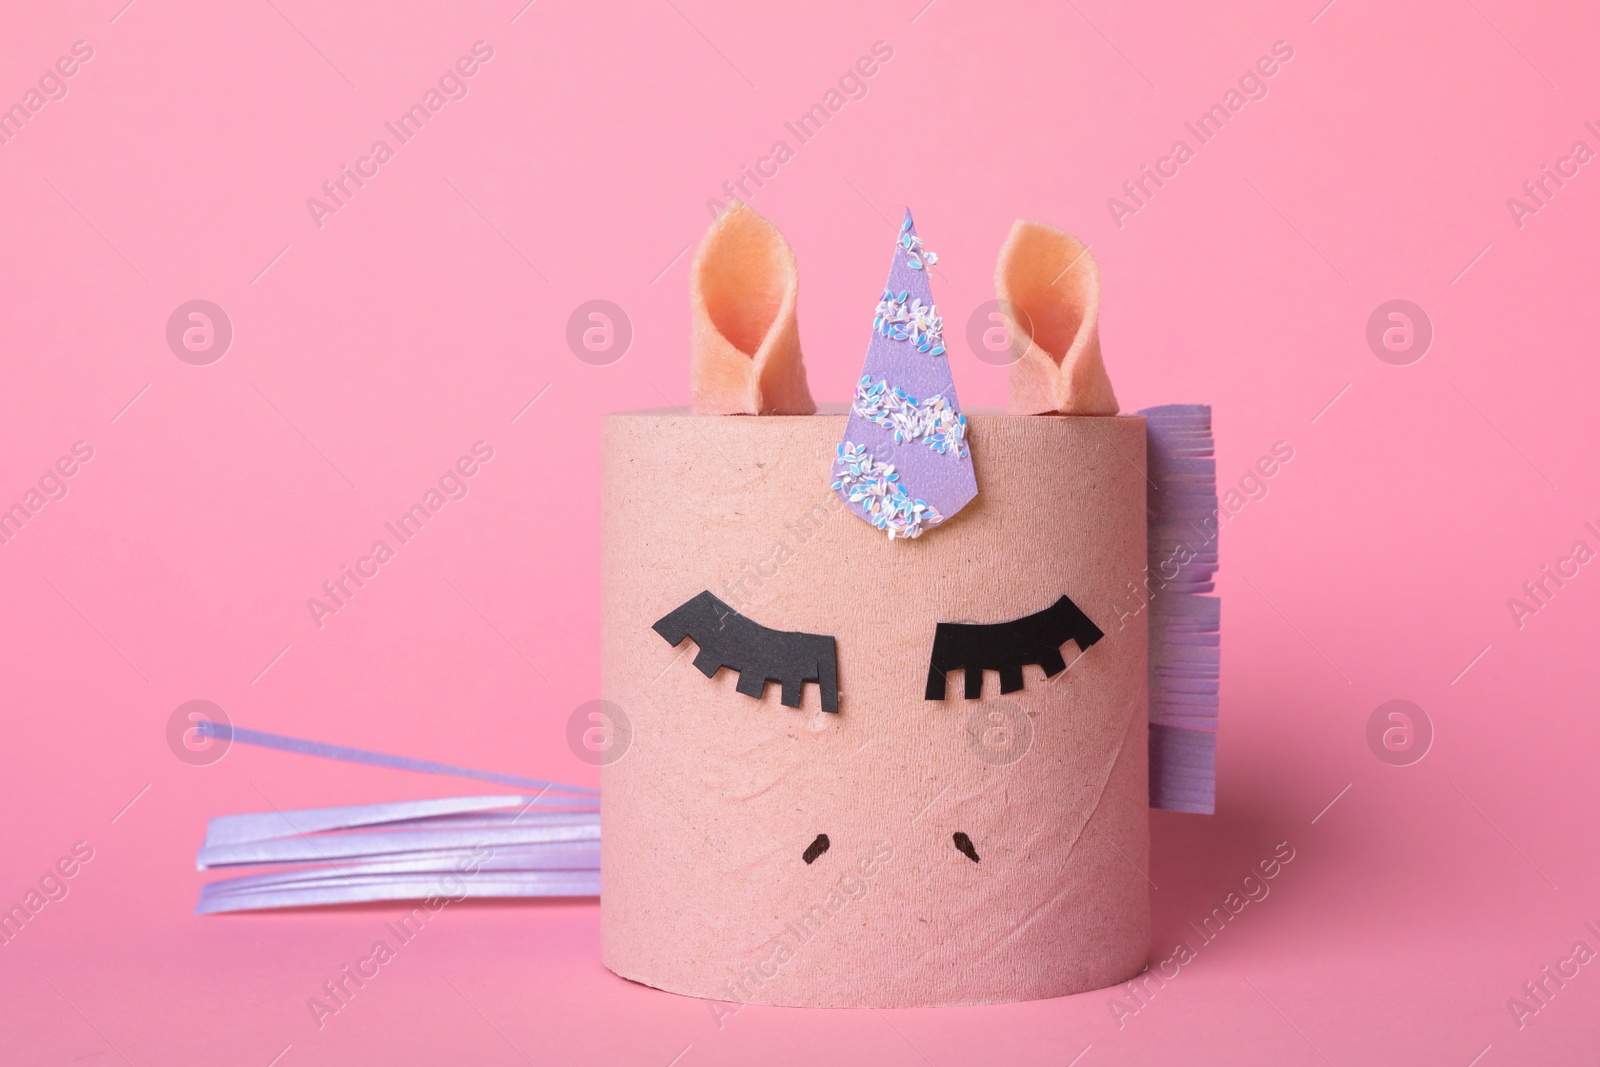 Photo of Toy unicorn made of toilet paper roll on pink background